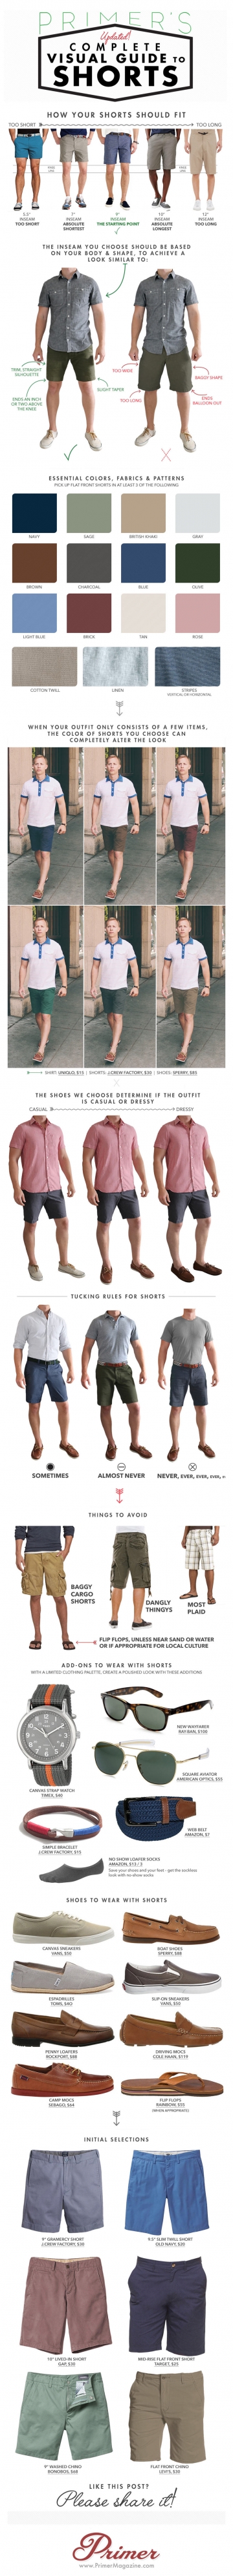 What to Wear with Shorts - For Men [Infographic]